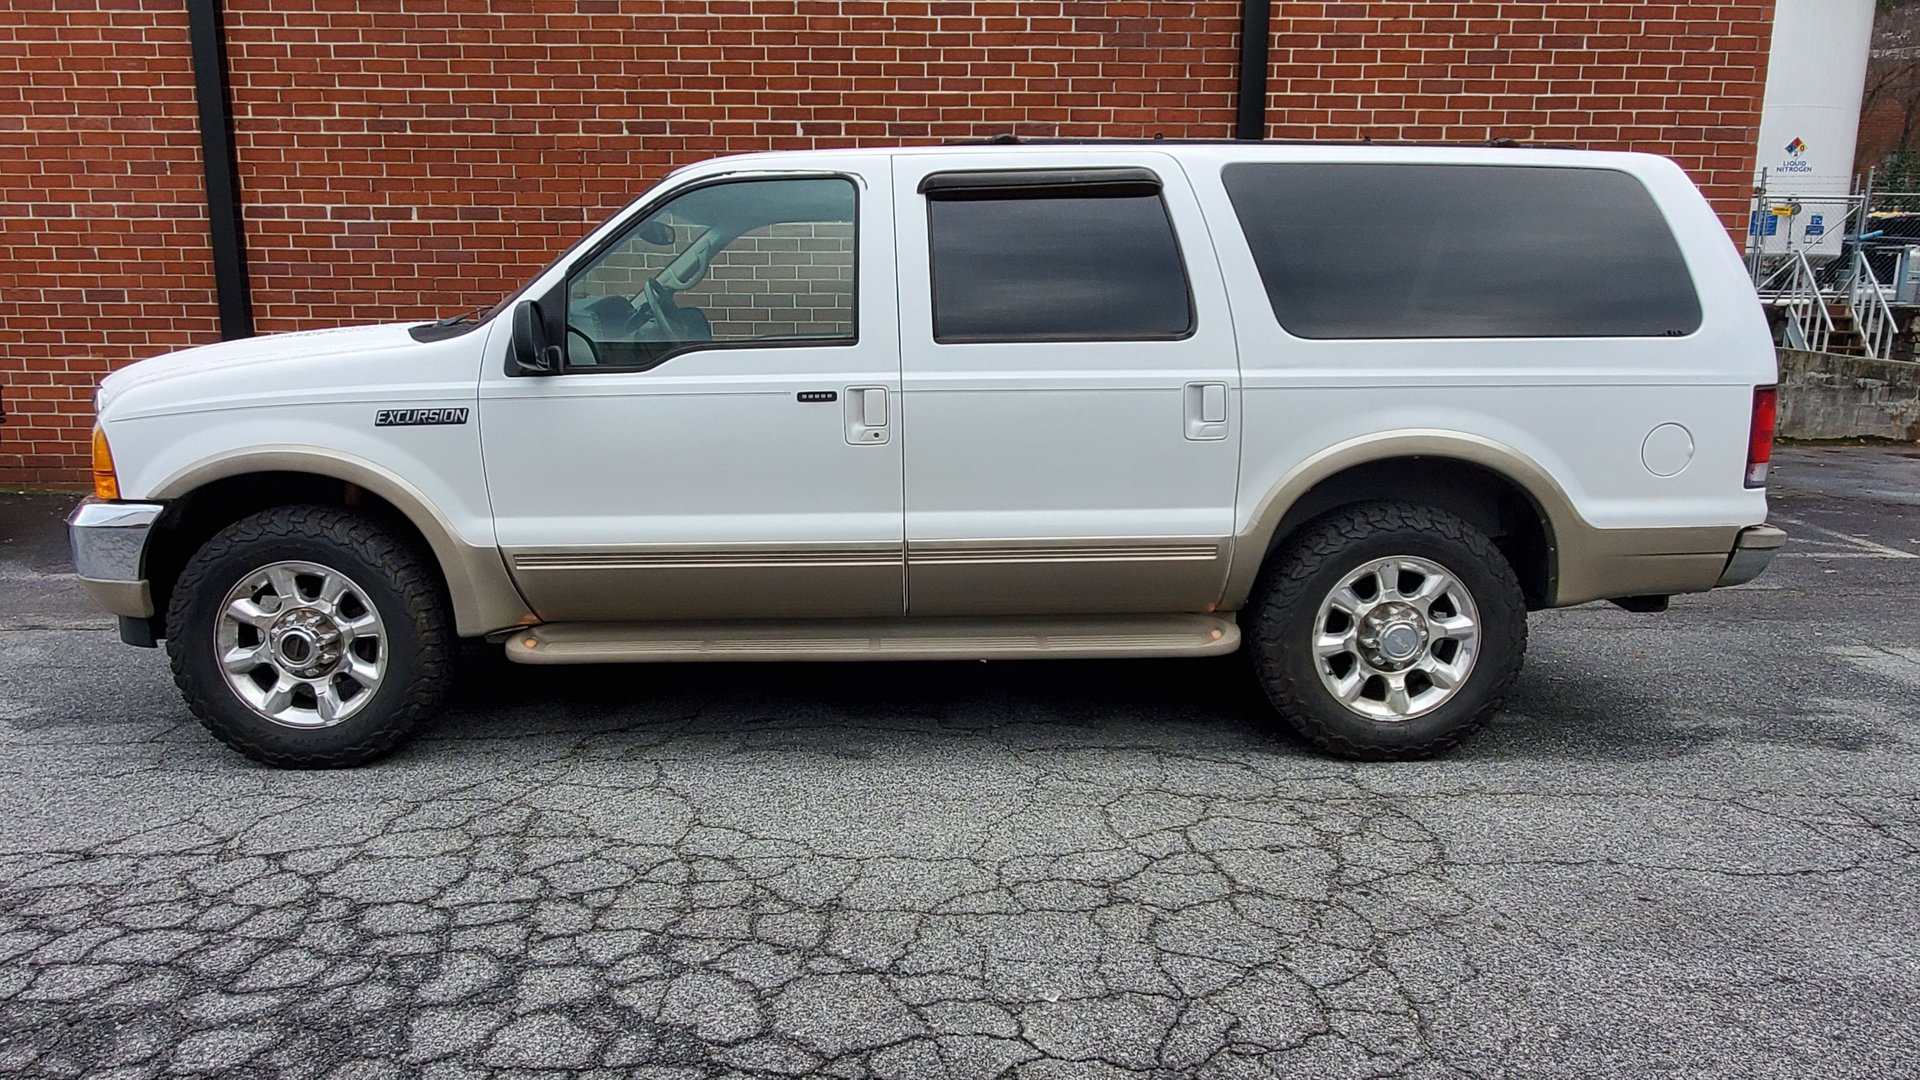 2001 Ford Excursion | GAA Classic Cars